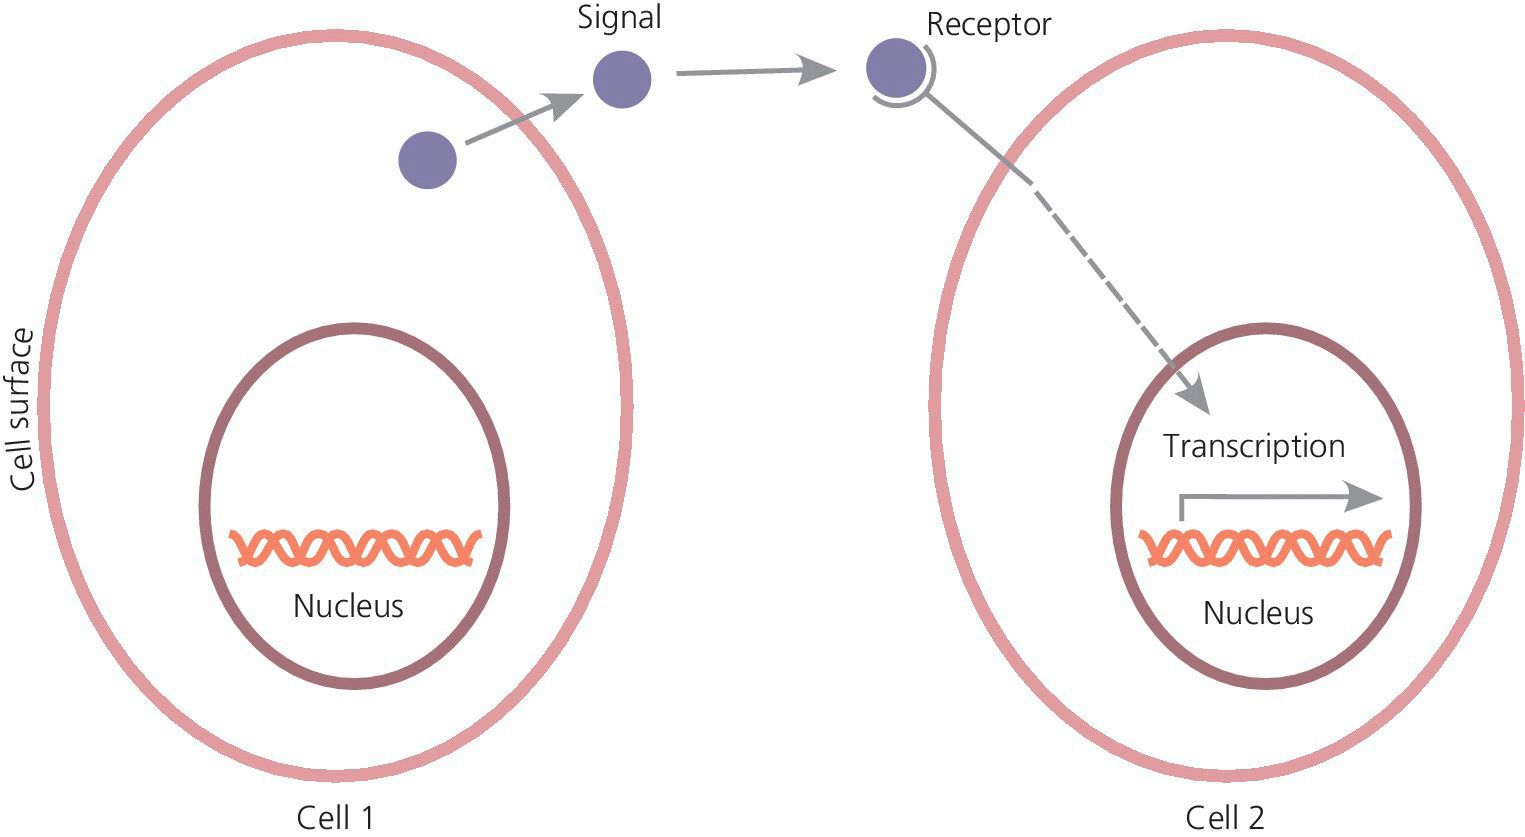 Schematic of cells communicating via soluble signal molecules (closed circles with arrows) from cell 1 to cell 2 regulating gene expression (transcription).